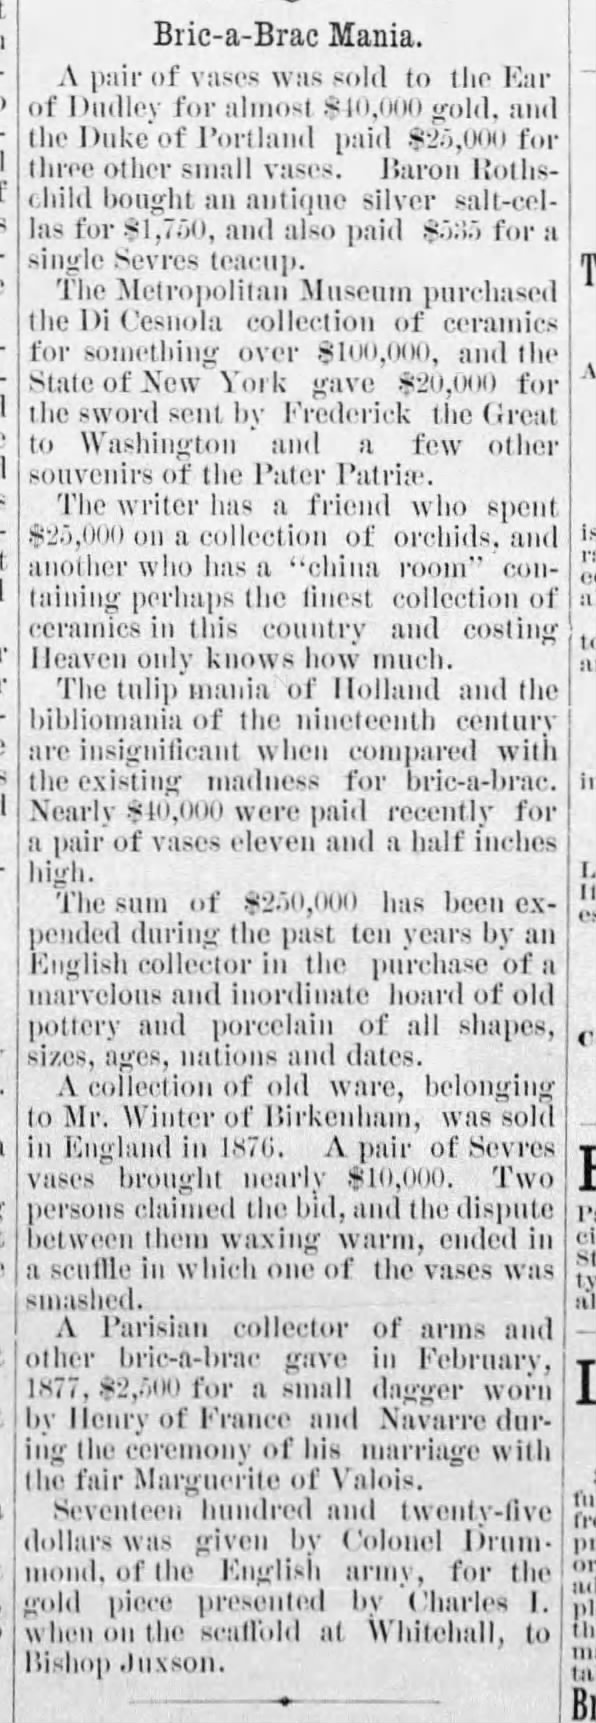 High prices being paid for bric-a-brac, 1887